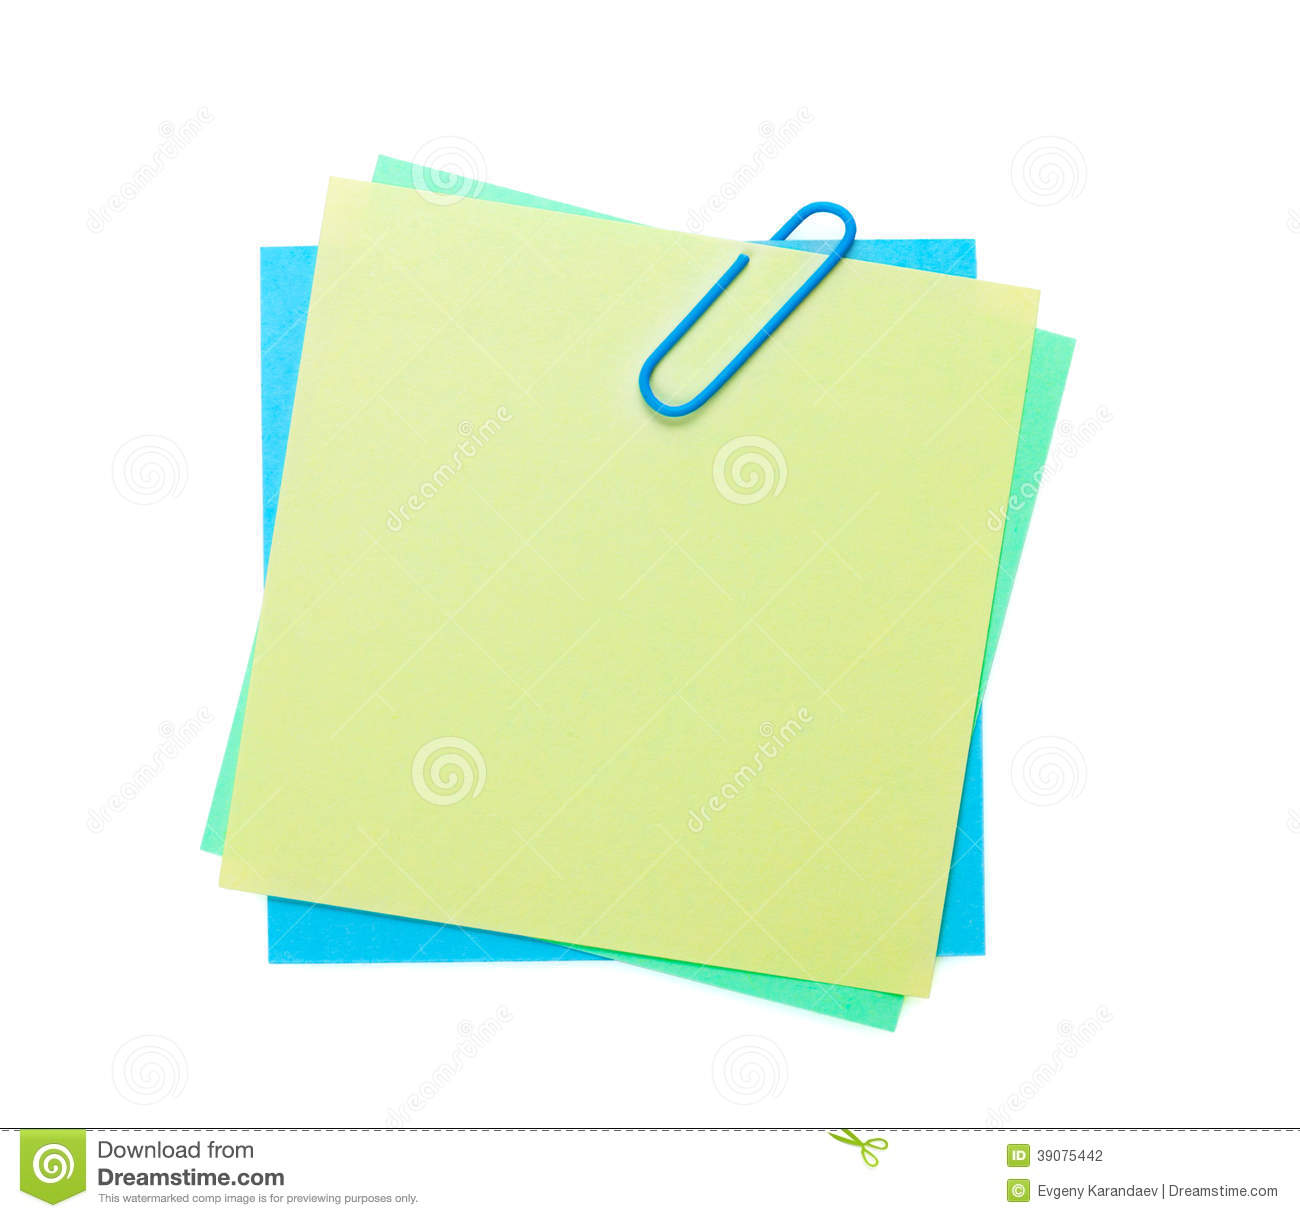 Post It Notes Clipart   Clipart Panda   Free Clipart Images